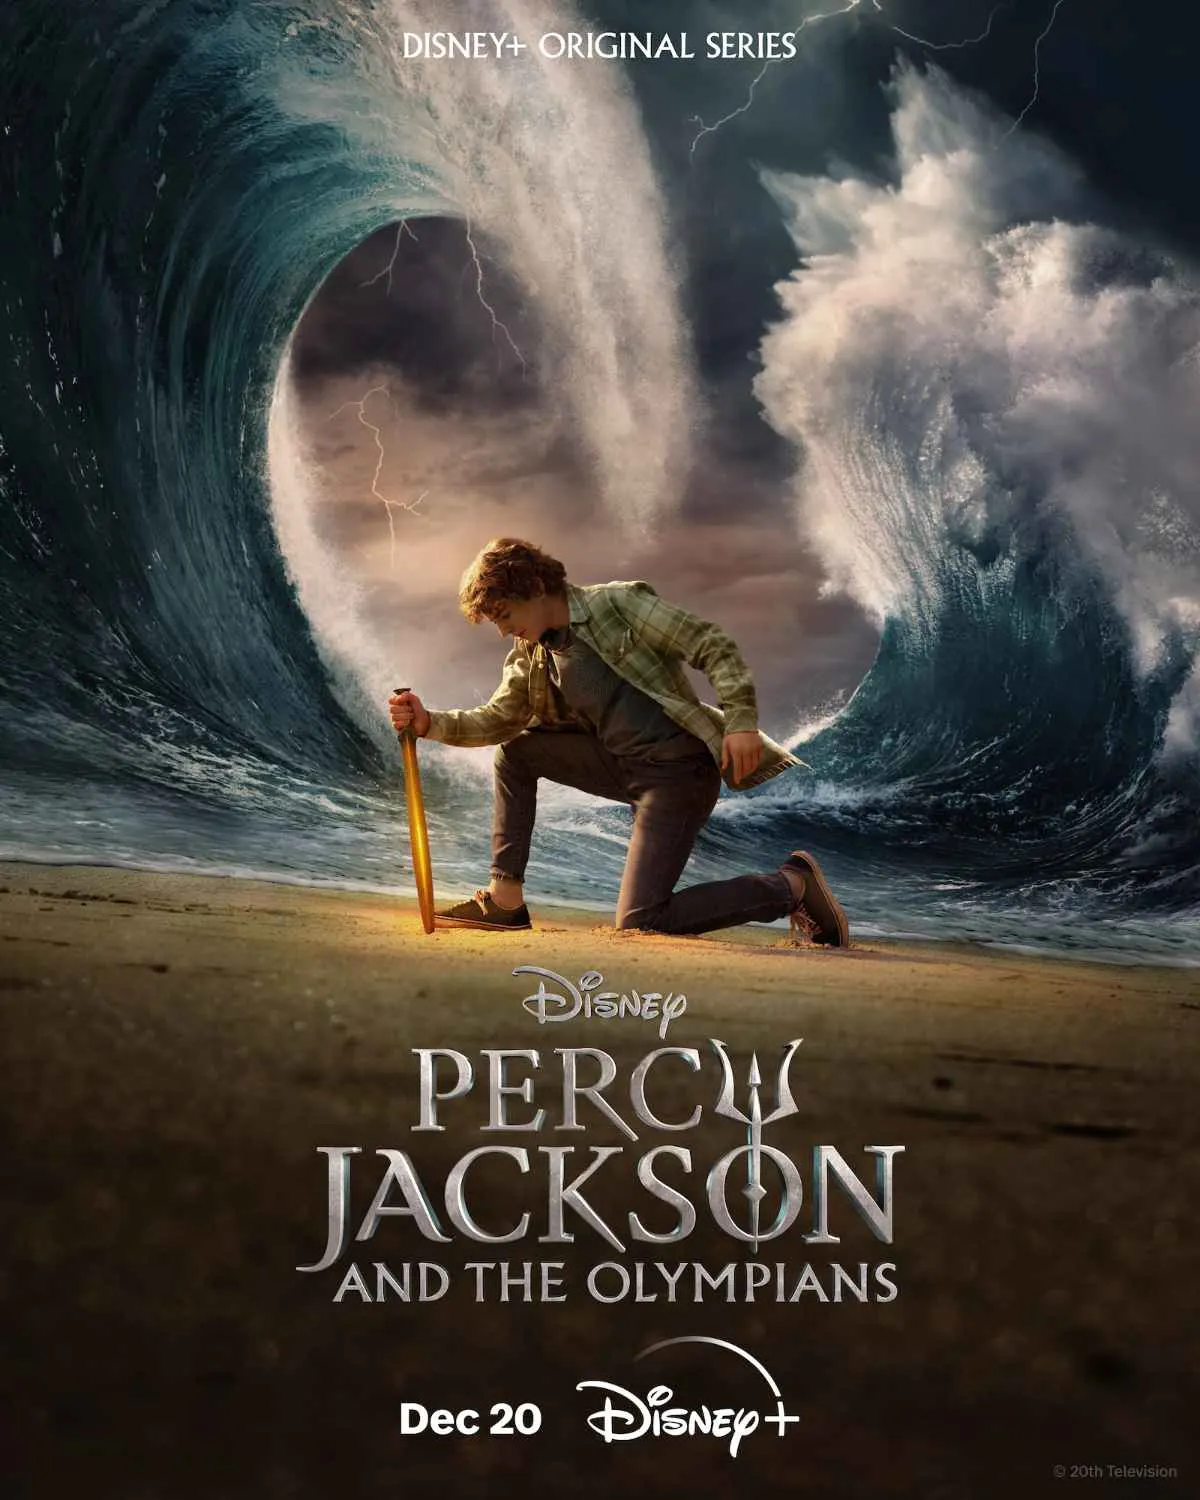 Percy Jackson and the Olympians Teaser Trailer and Art